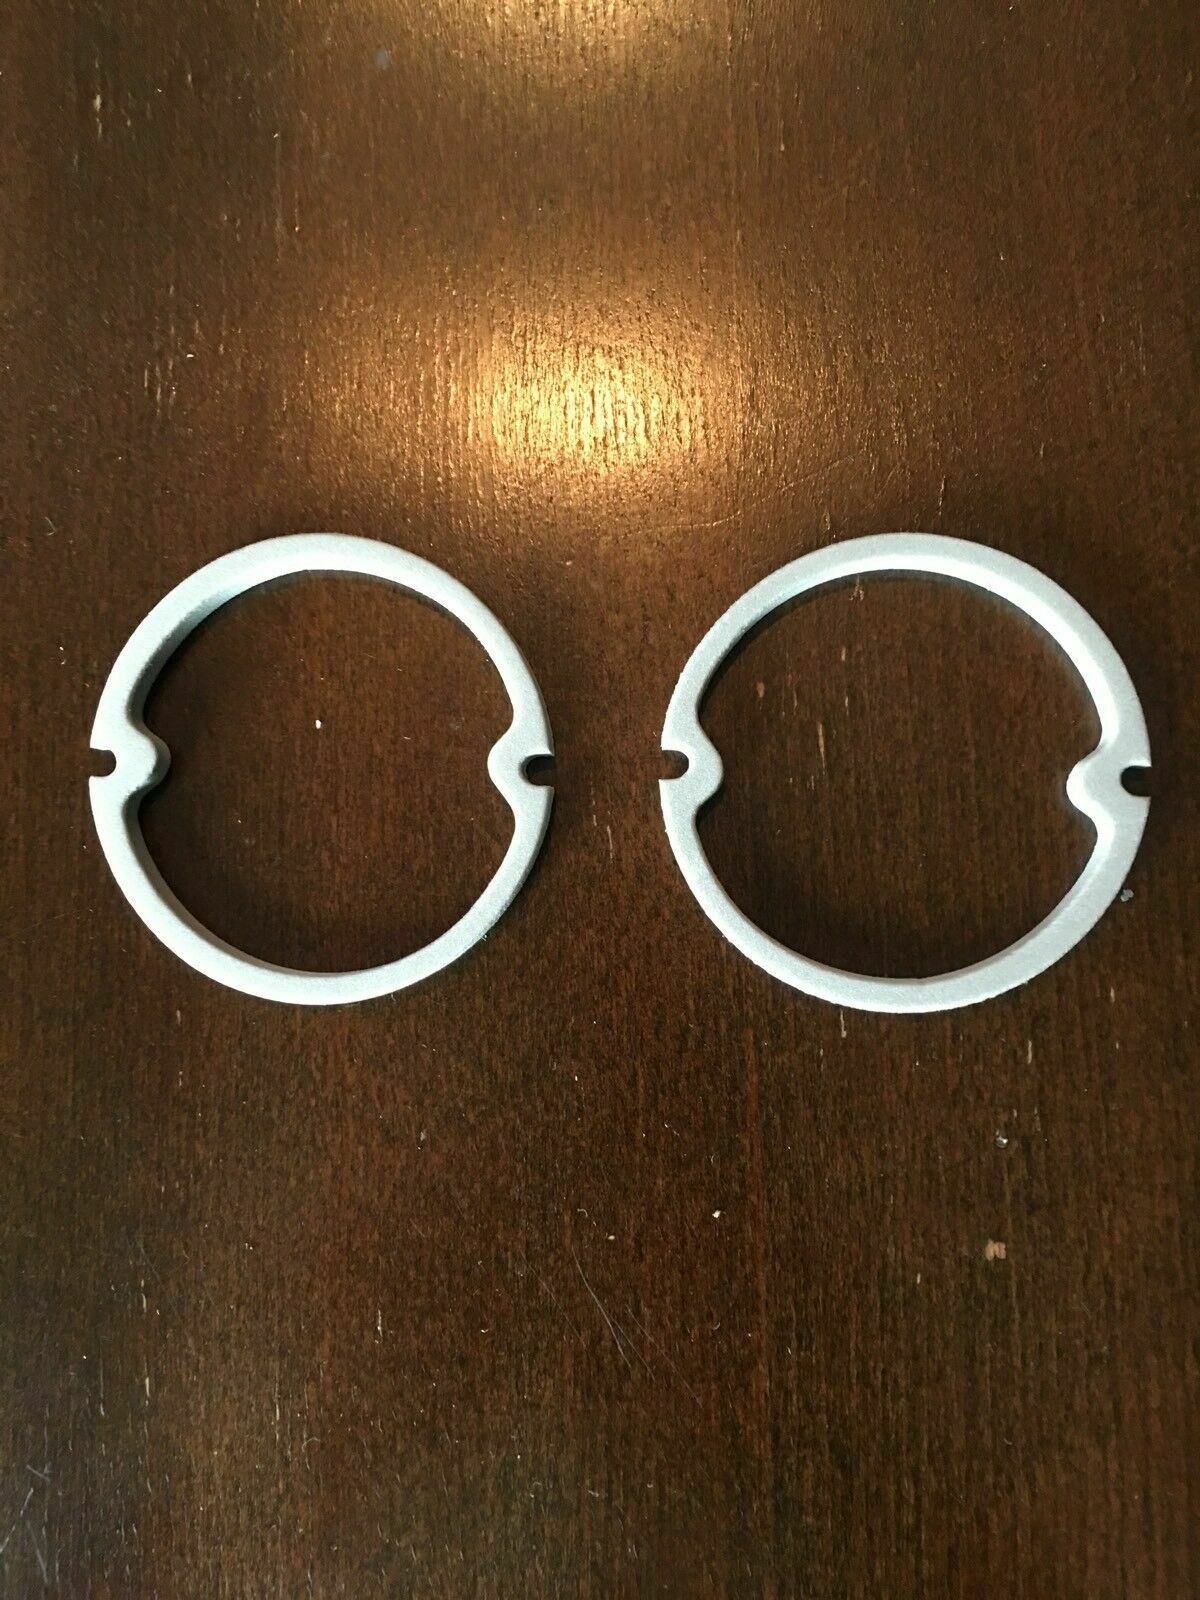 Gaskets: NEW 1966-1987 Chevy GMC Truck Stepside Back Up Lens Gaskets ( 1 pair )